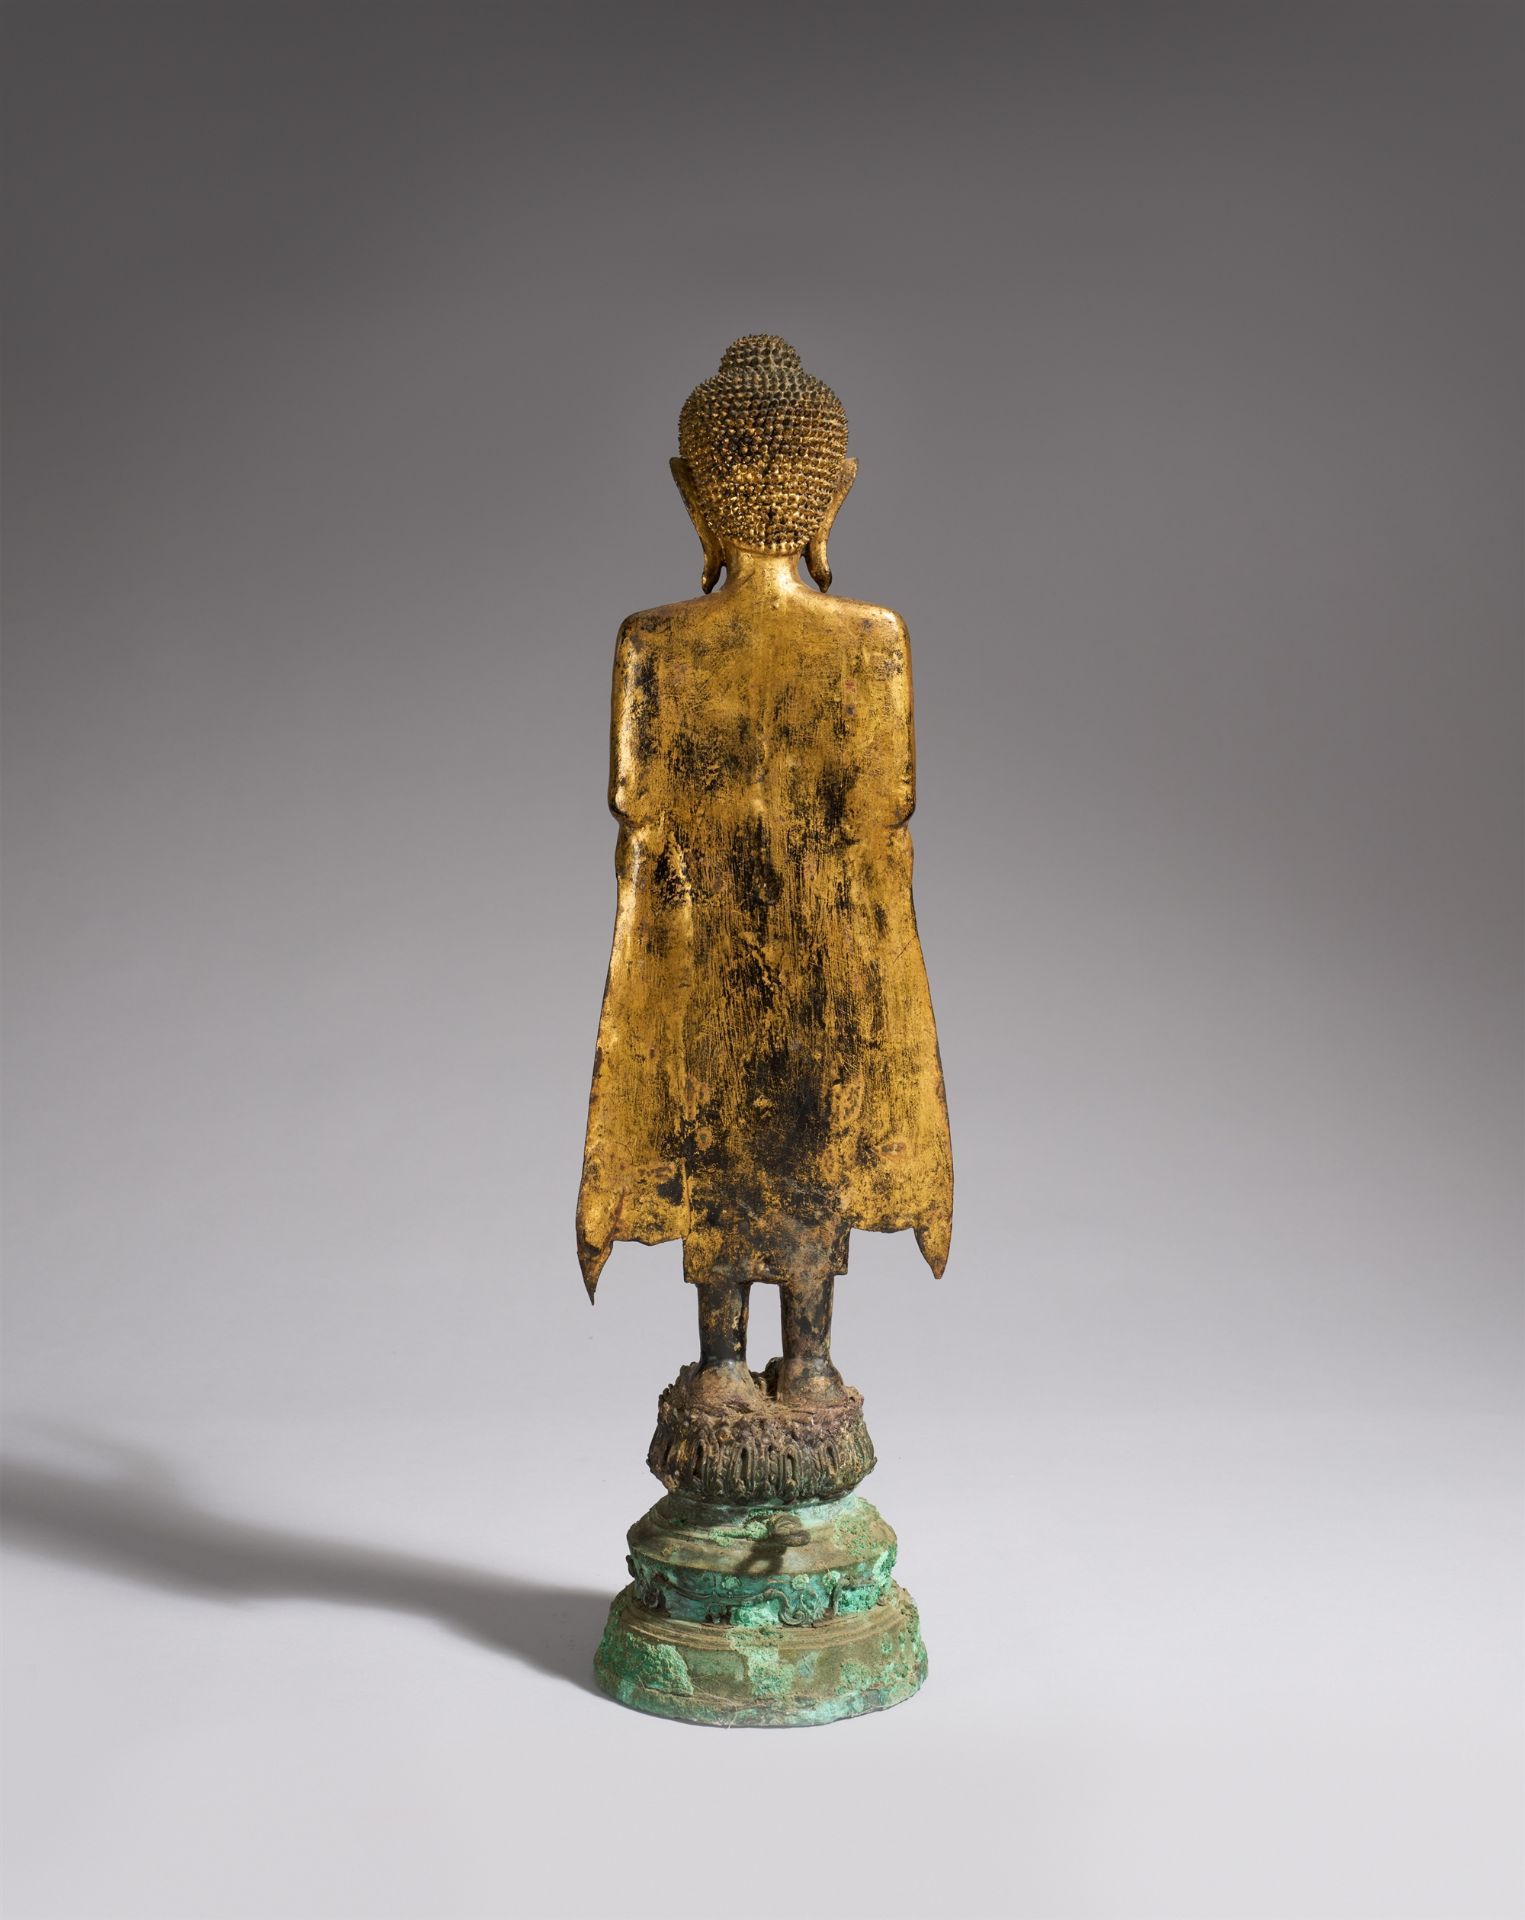 An Ayutthaya-style gilded and lacquered bronze figure of a Buddha. Thailand. 18th/19th century - Image 2 of 2